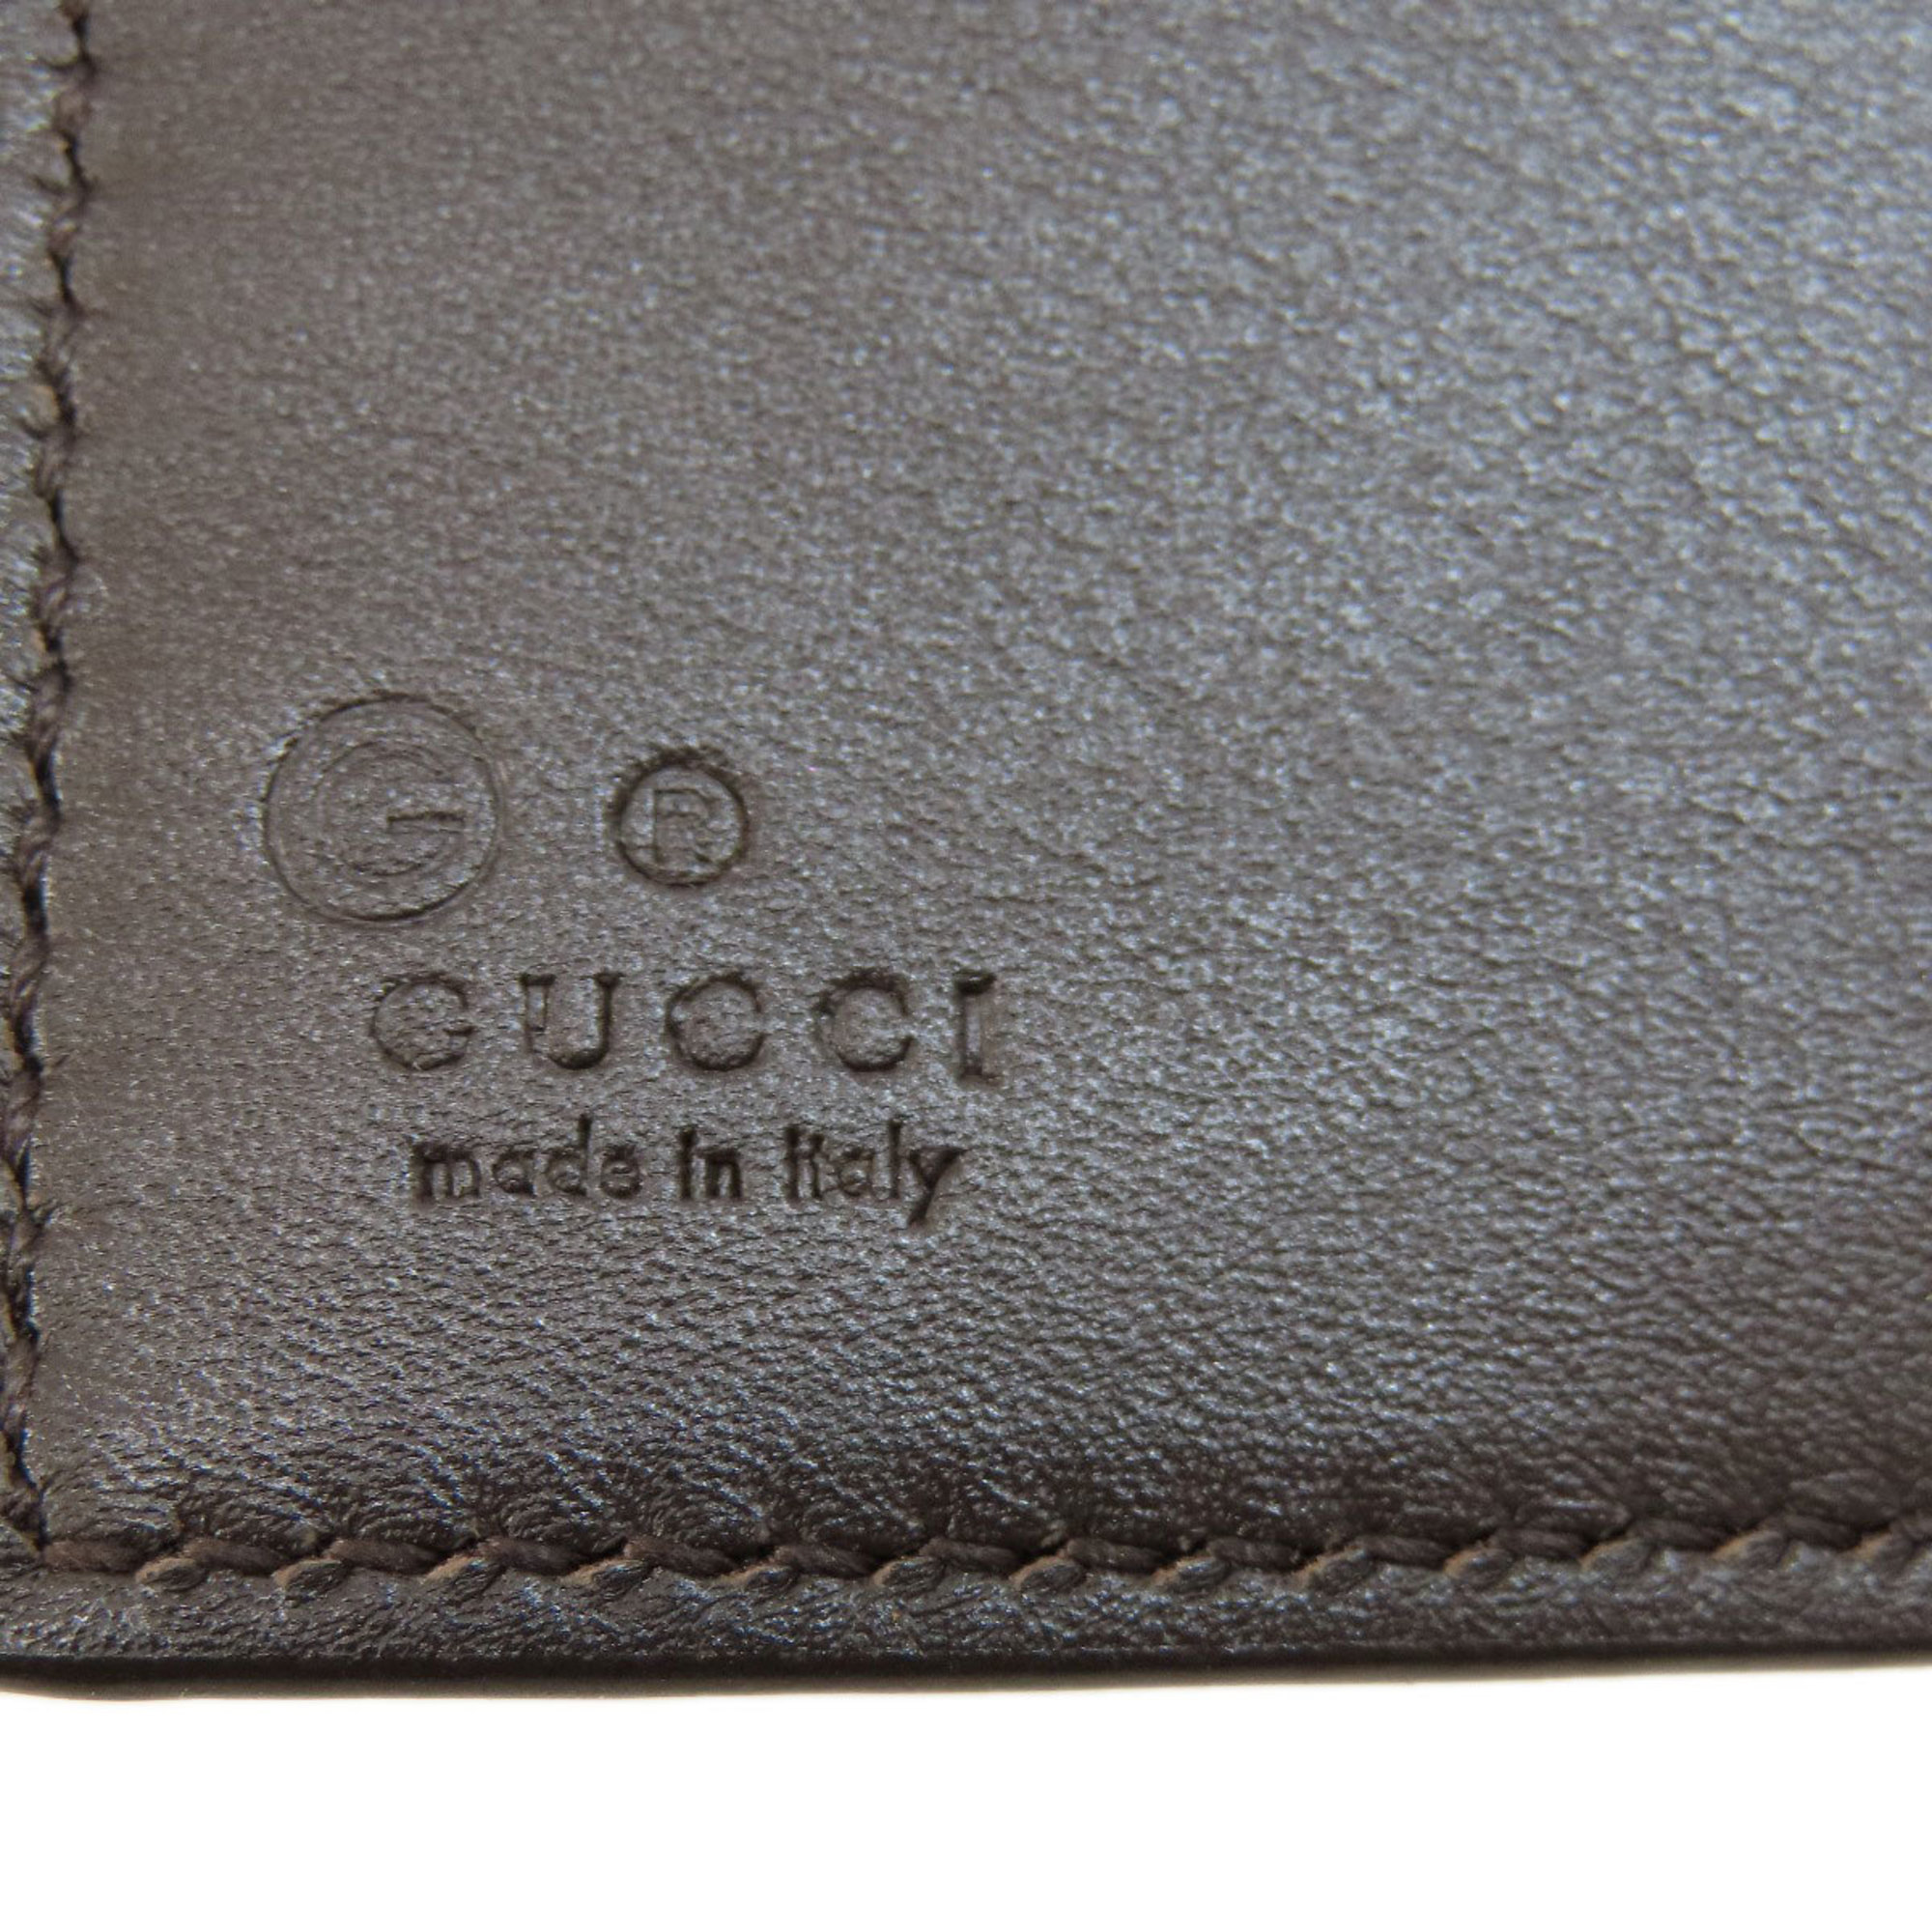 Gucci 544472 Micro Guccissima Outlet Bi-fold Wallet Leather Women's GUCCI